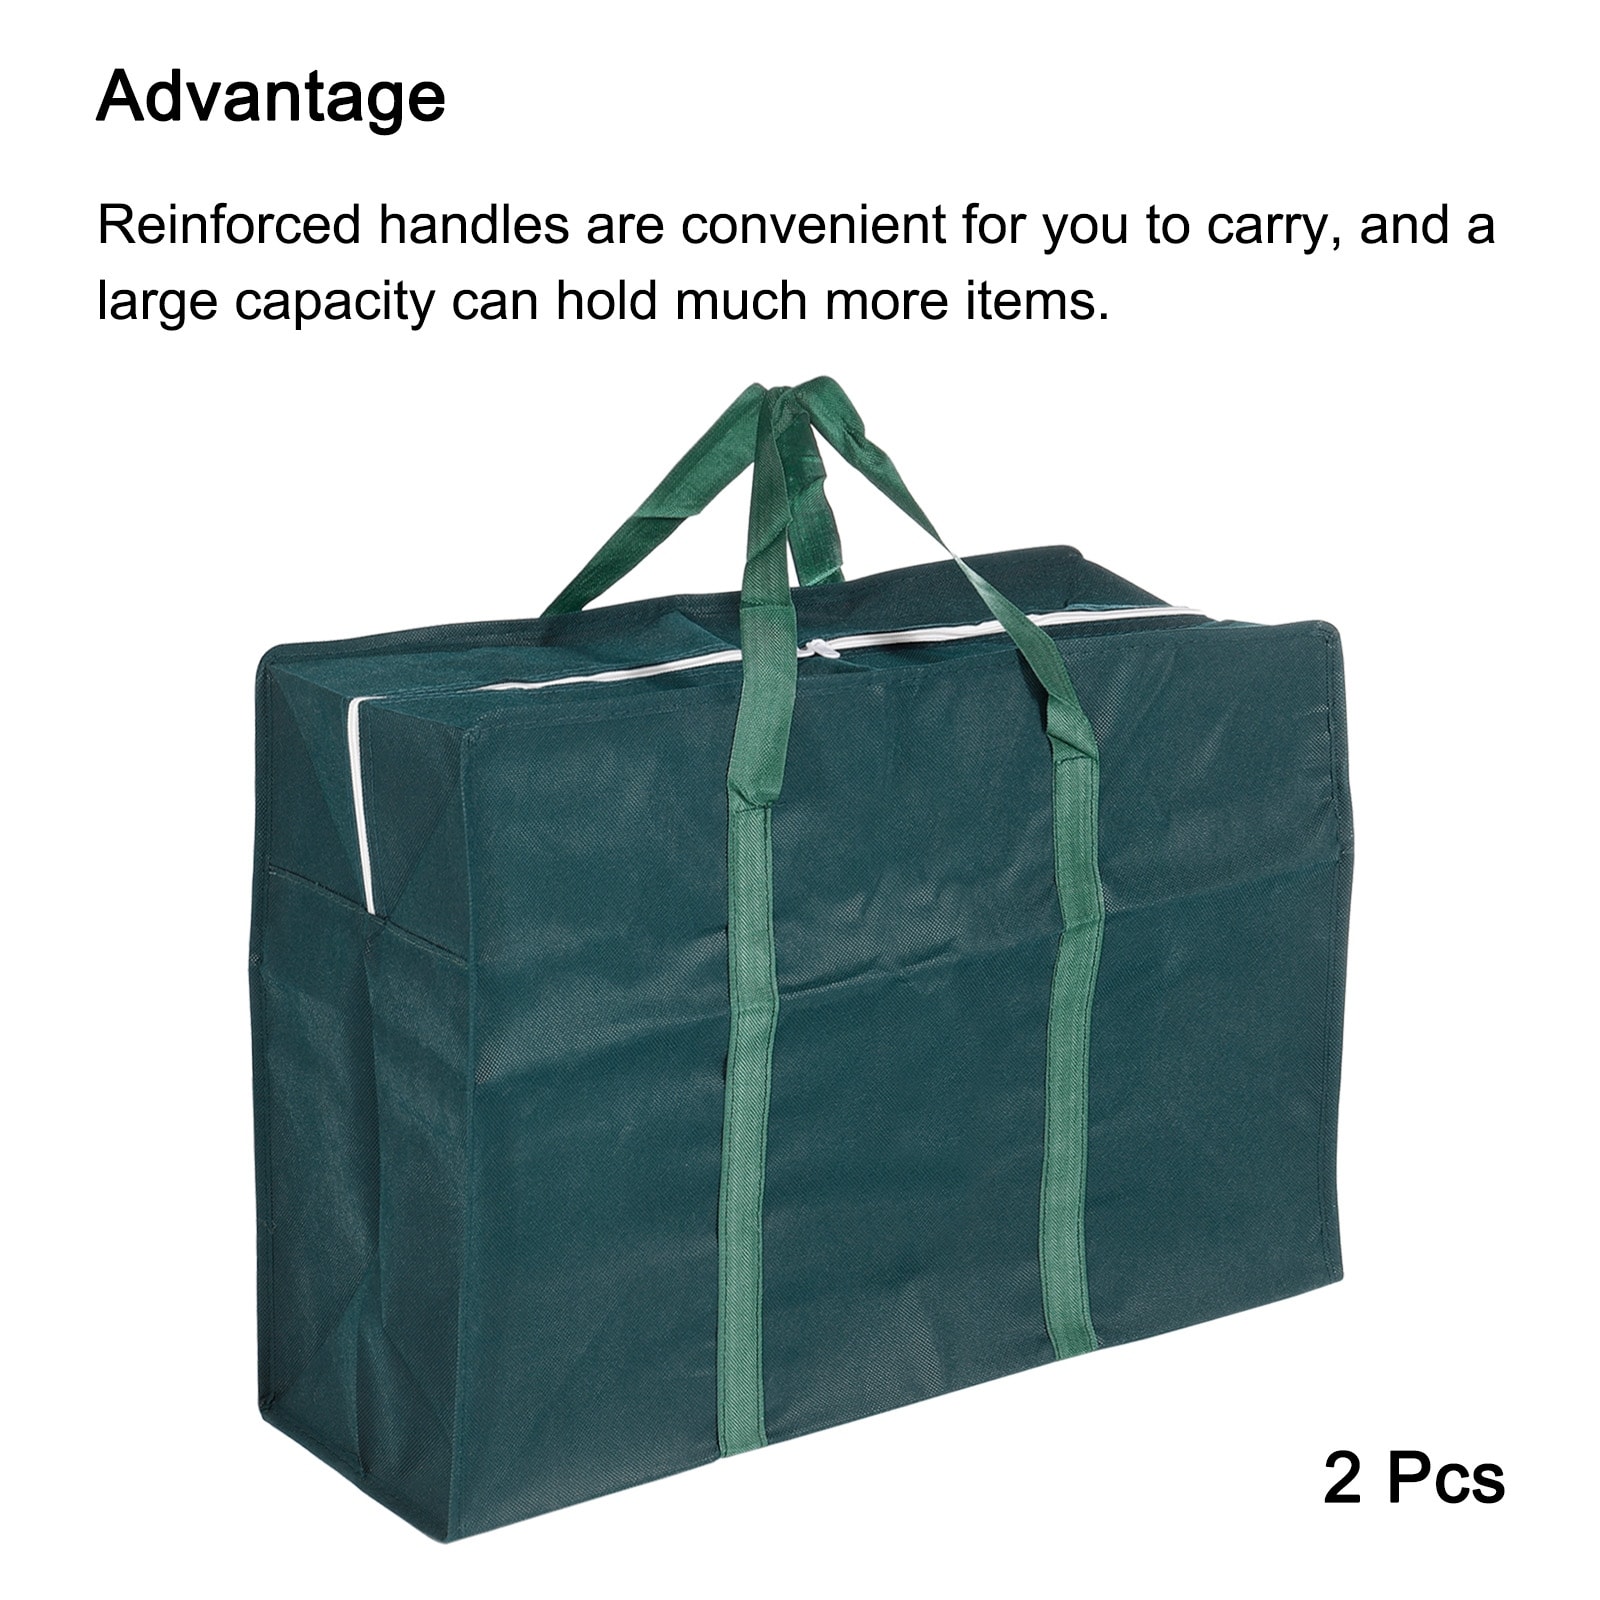 Extra Large PEVA Zippered Storage Bags with Handles, 3 Pcs. 21.6